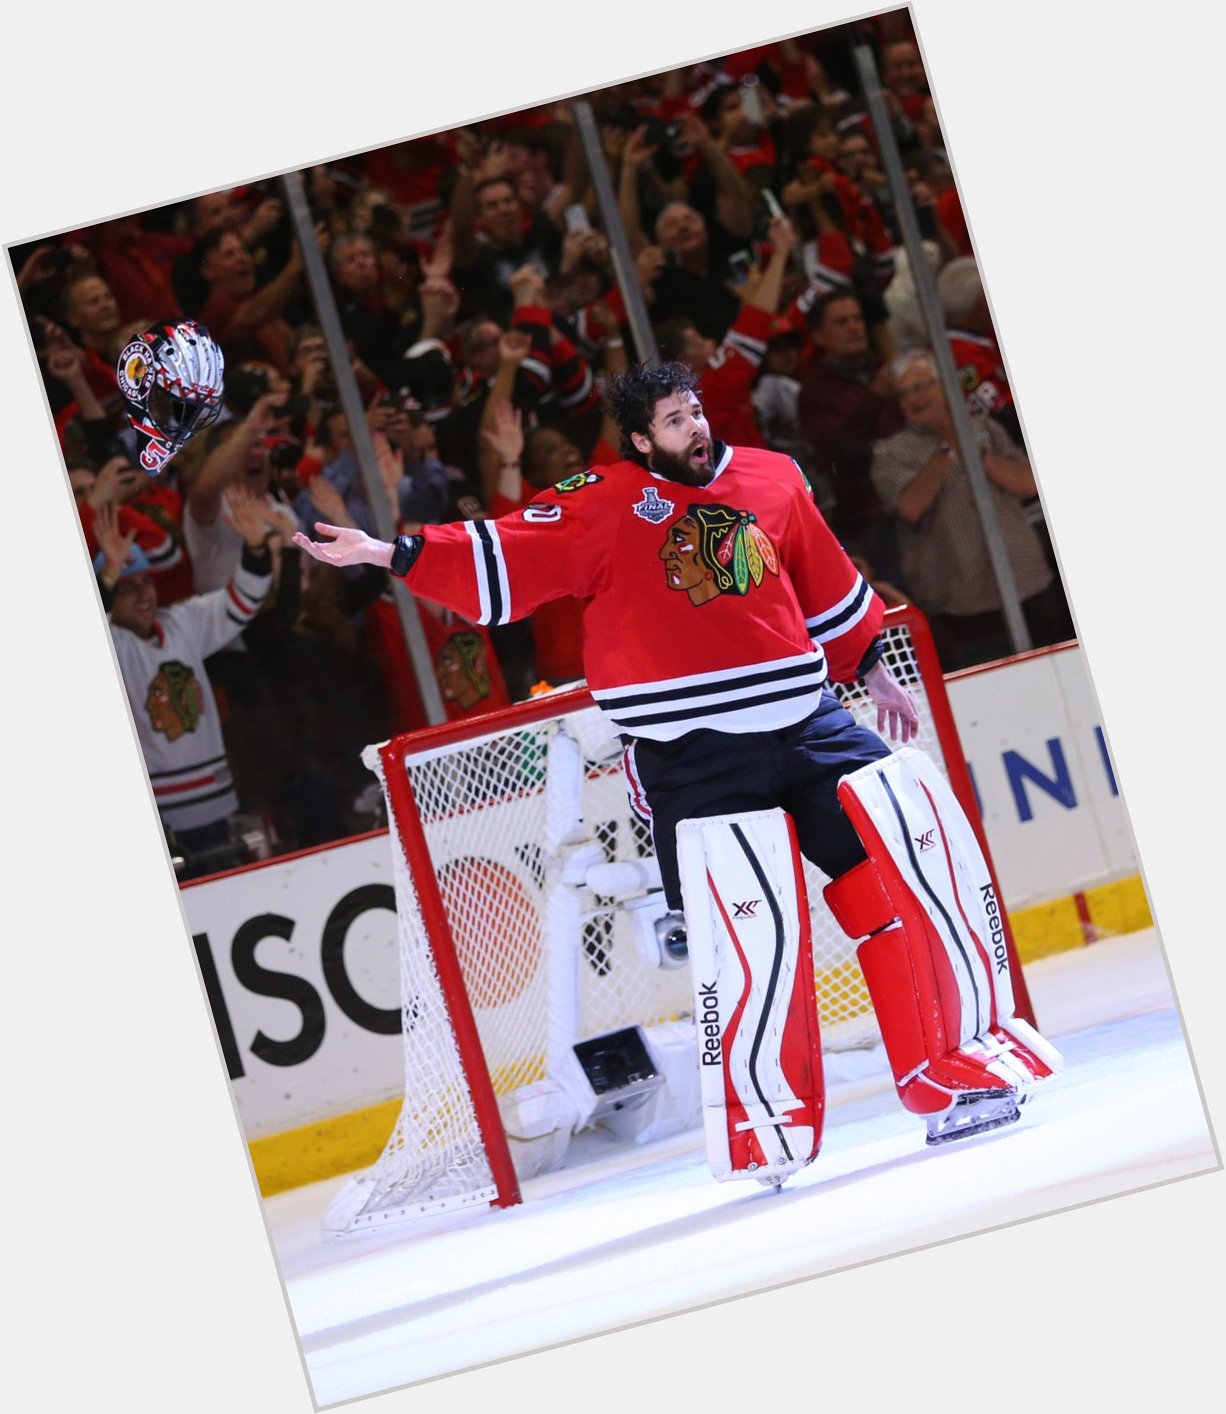 Happy Birthday to 1 of our favorites, Corey Crawford! Beat the Avs!    